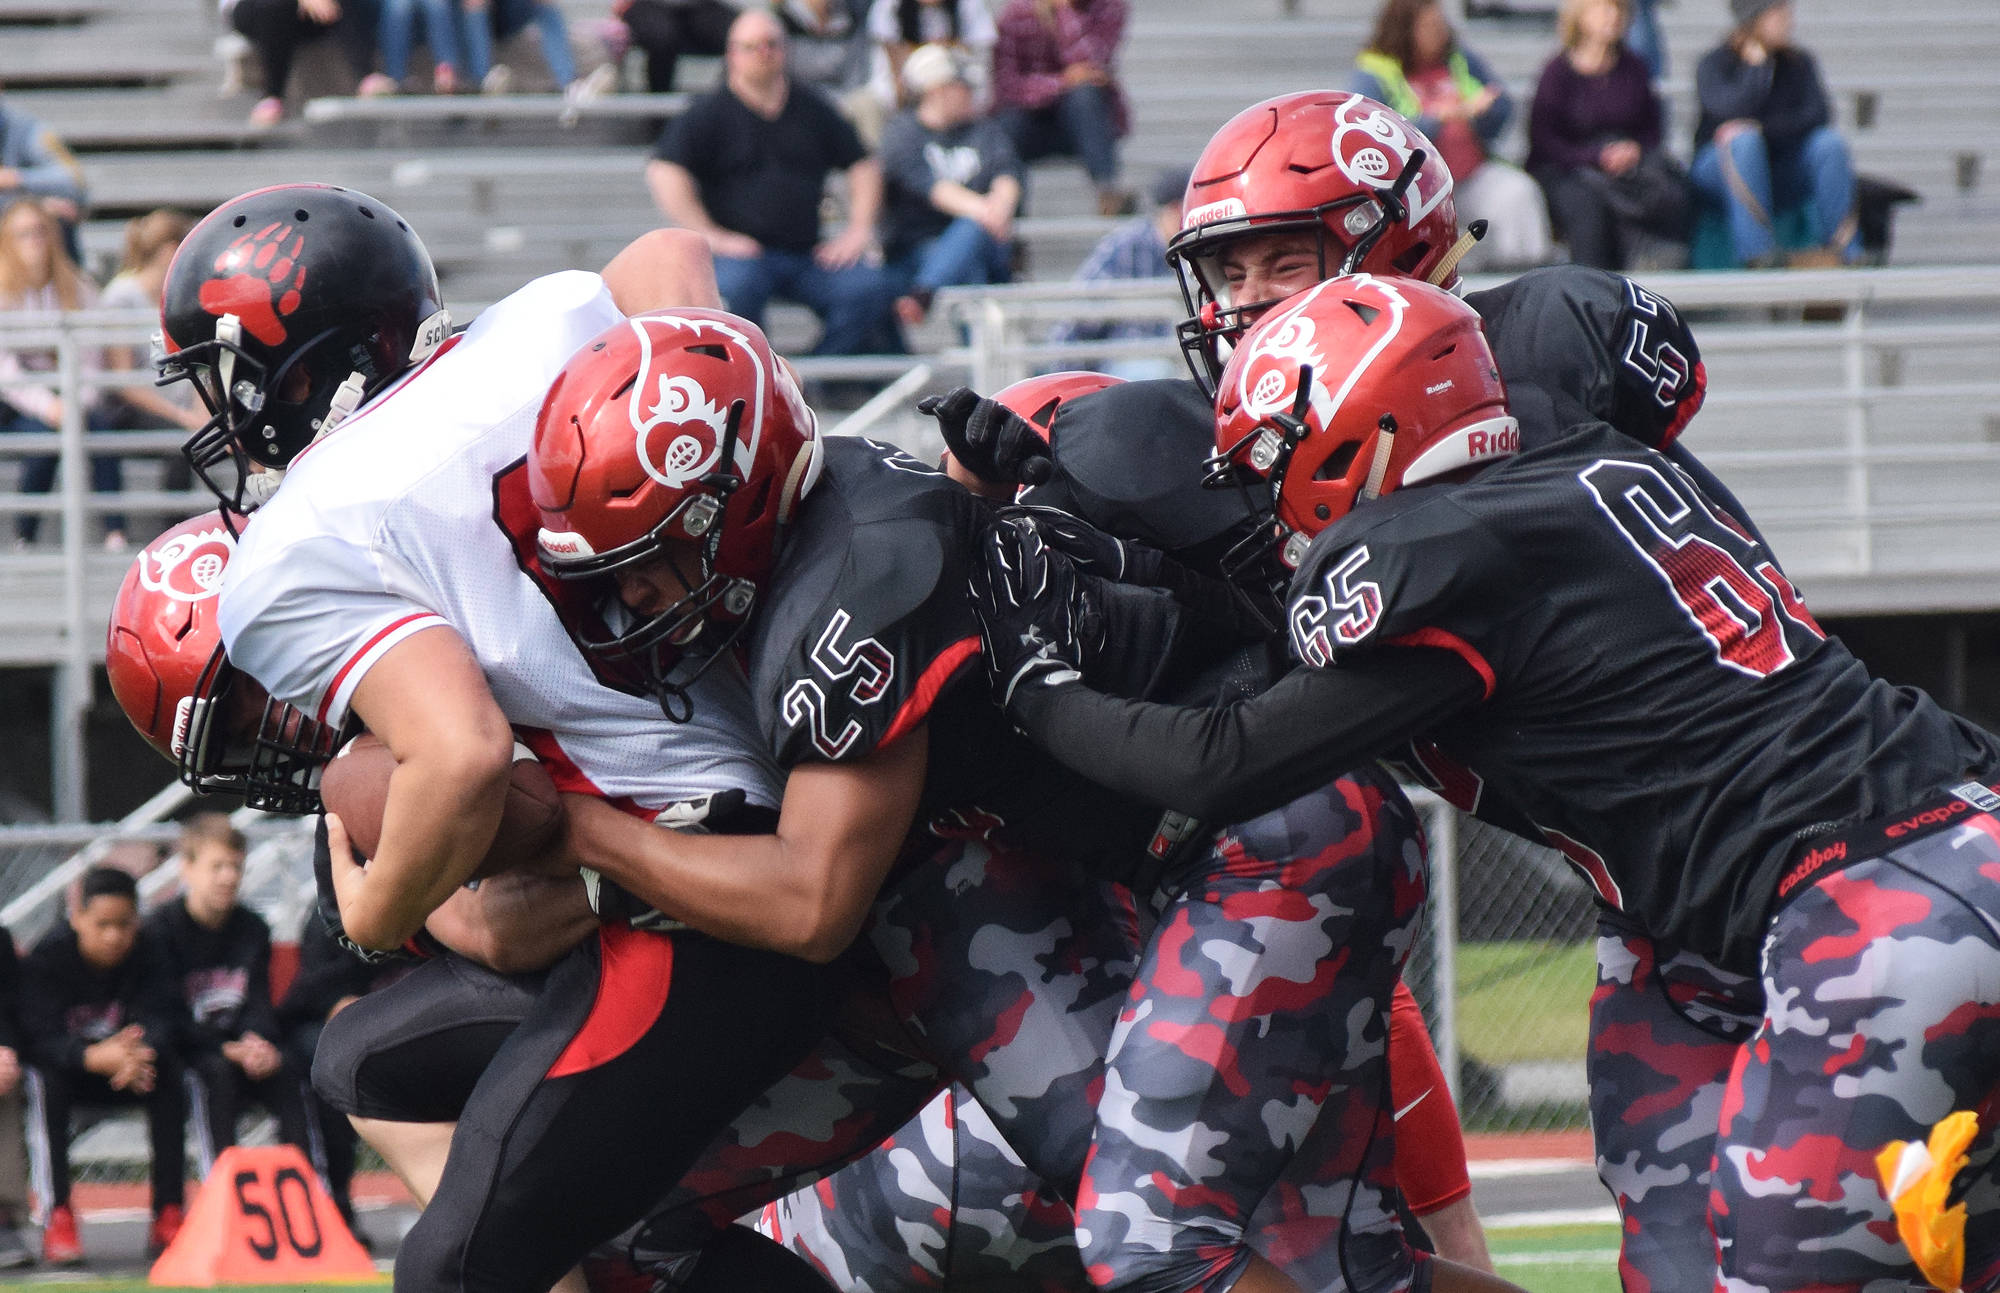 Juneau running back Liam Van Sickle gets tackled by several Kenai defenders, including James Siamani (25) and John Grossl (65) Saturday afternoon at Ed Hollier Field in Kenai. (Photo by Joey Klecka/Peninsula Clarion)